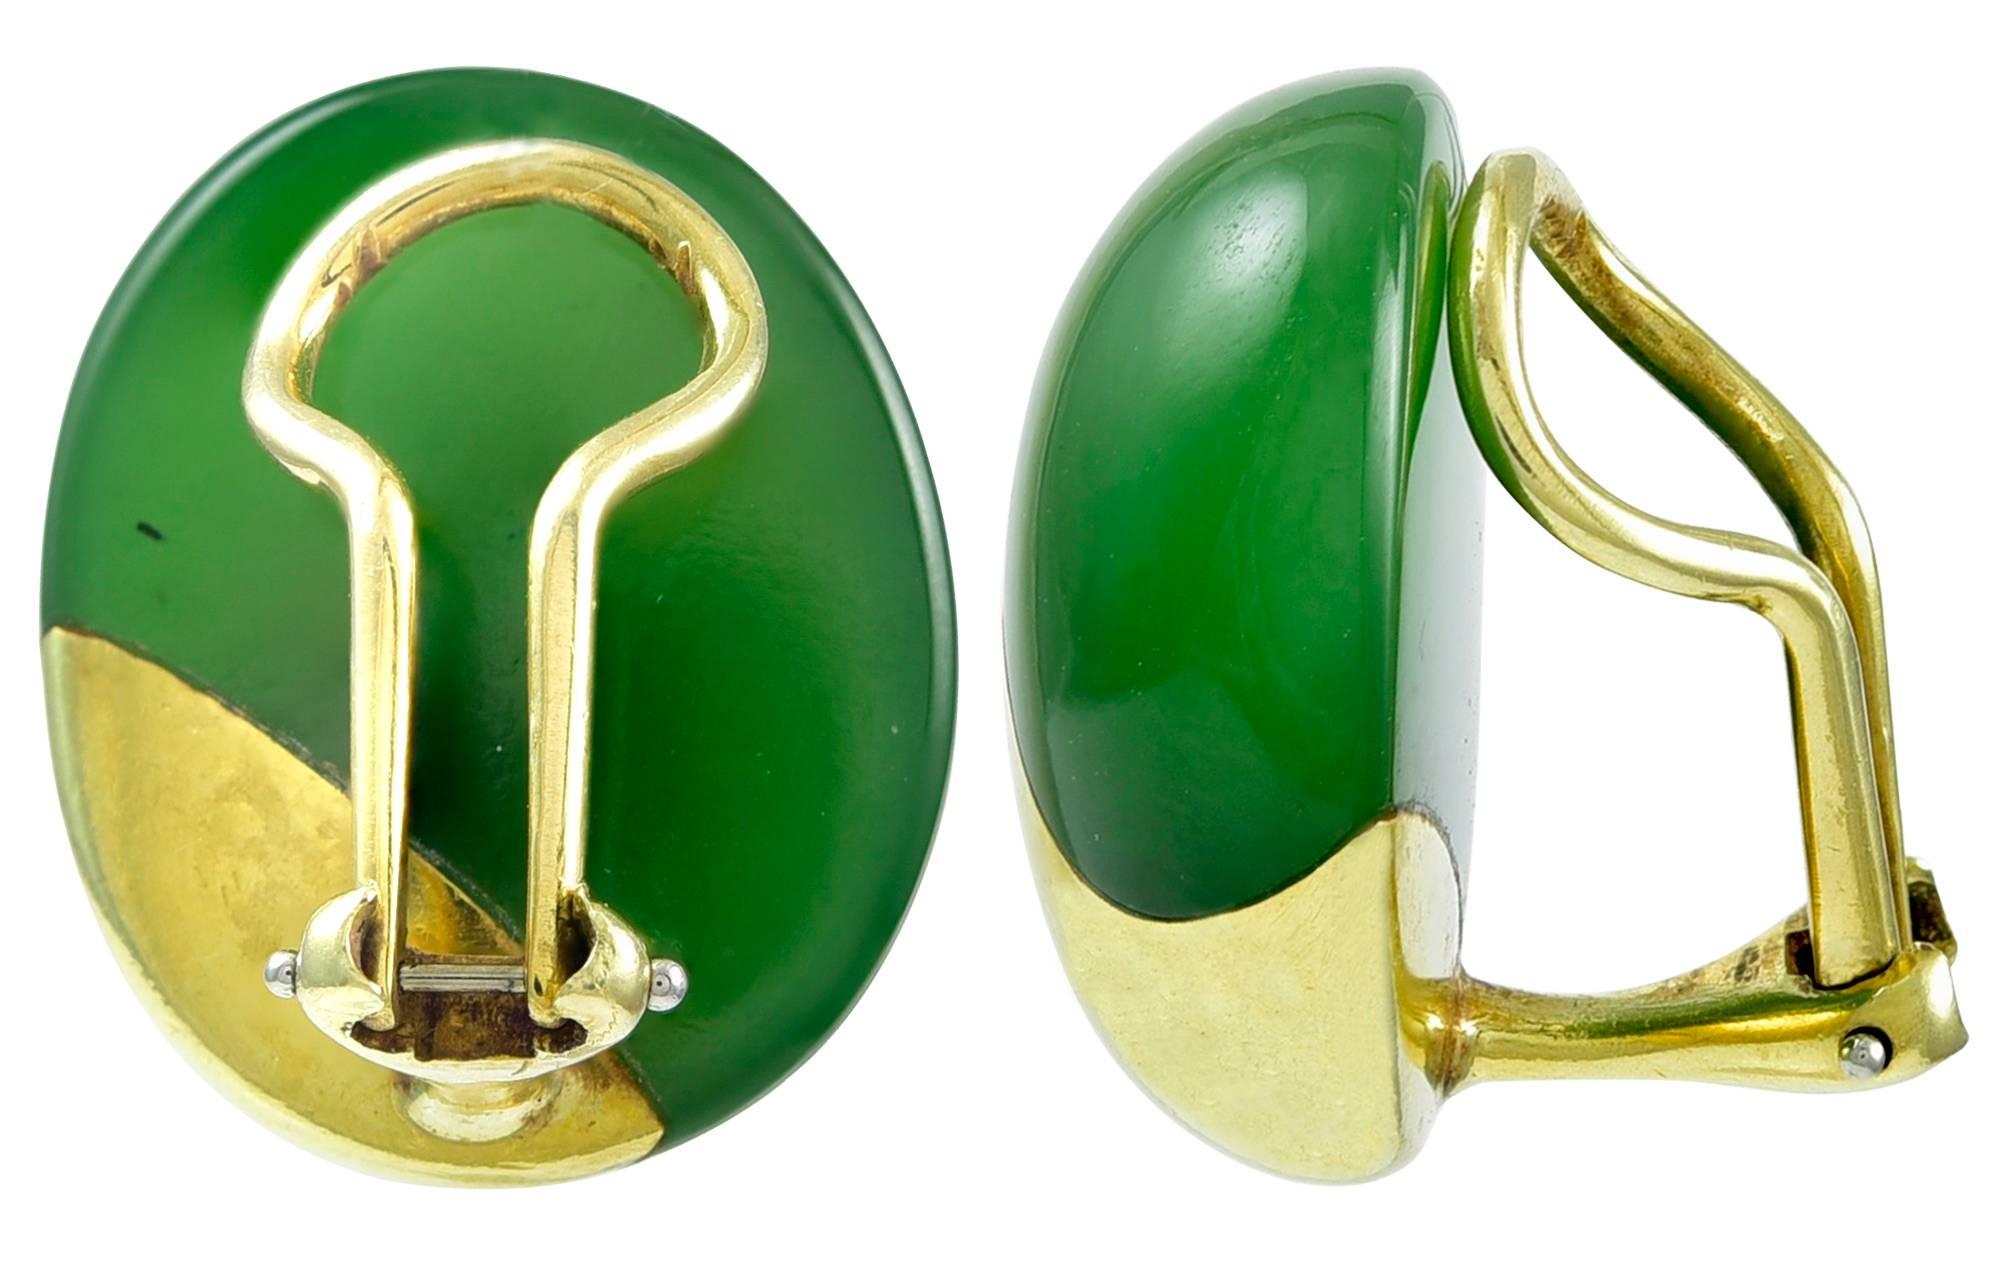 Soft oval shapes carved from nephrite jade and inlaid asymmetrically with burnished yellow gold designs, omega clip backs, unsigned, with scratch inventory numbers like those of Tiffany & Co jewelry, measuring approximately 7/8 inches high, weighing